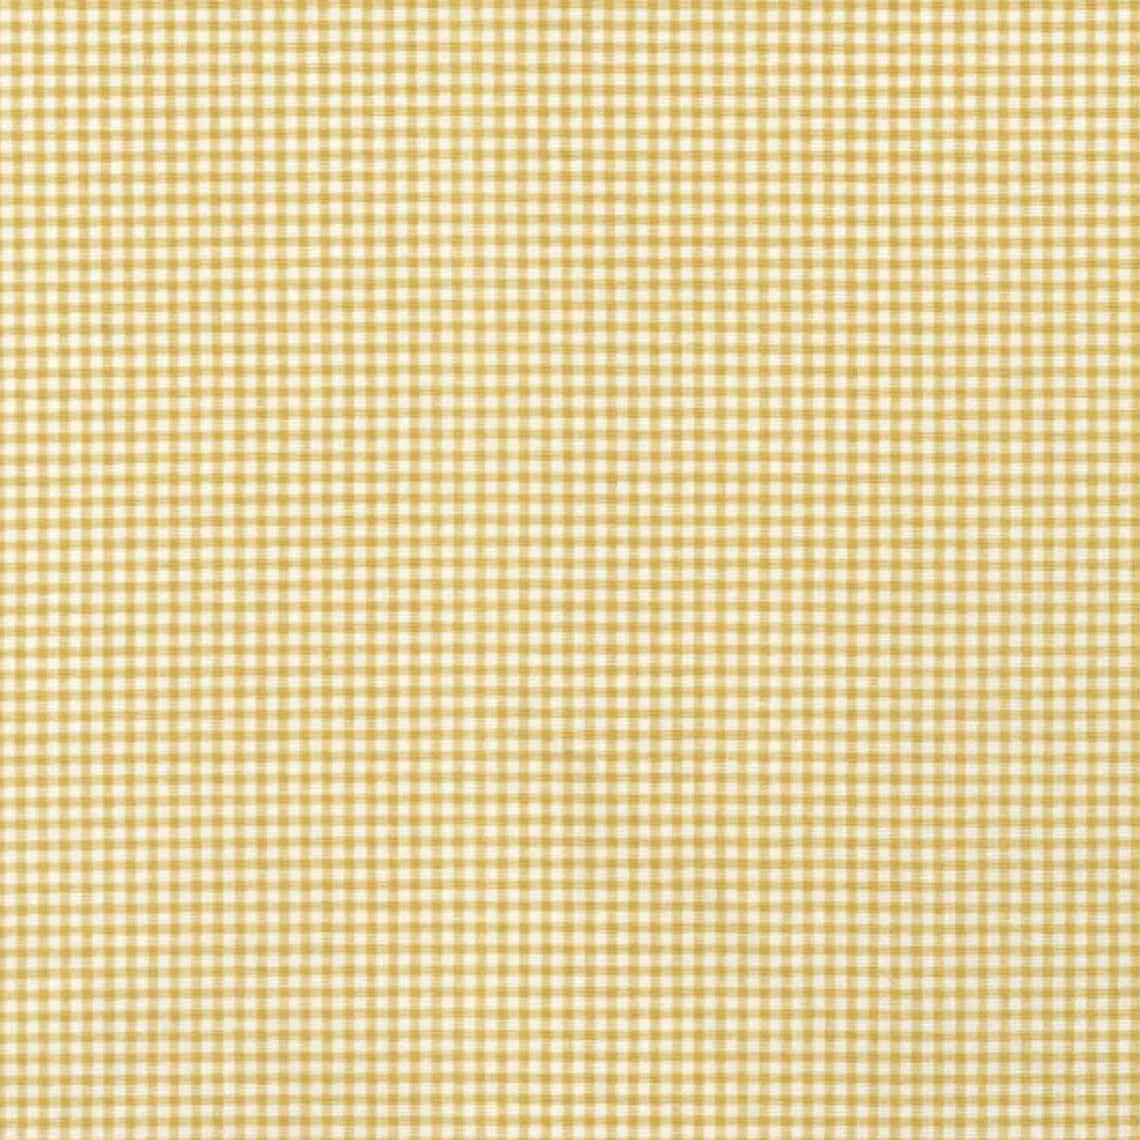 tailored valance in farmhouse barley yellow gold gingham check